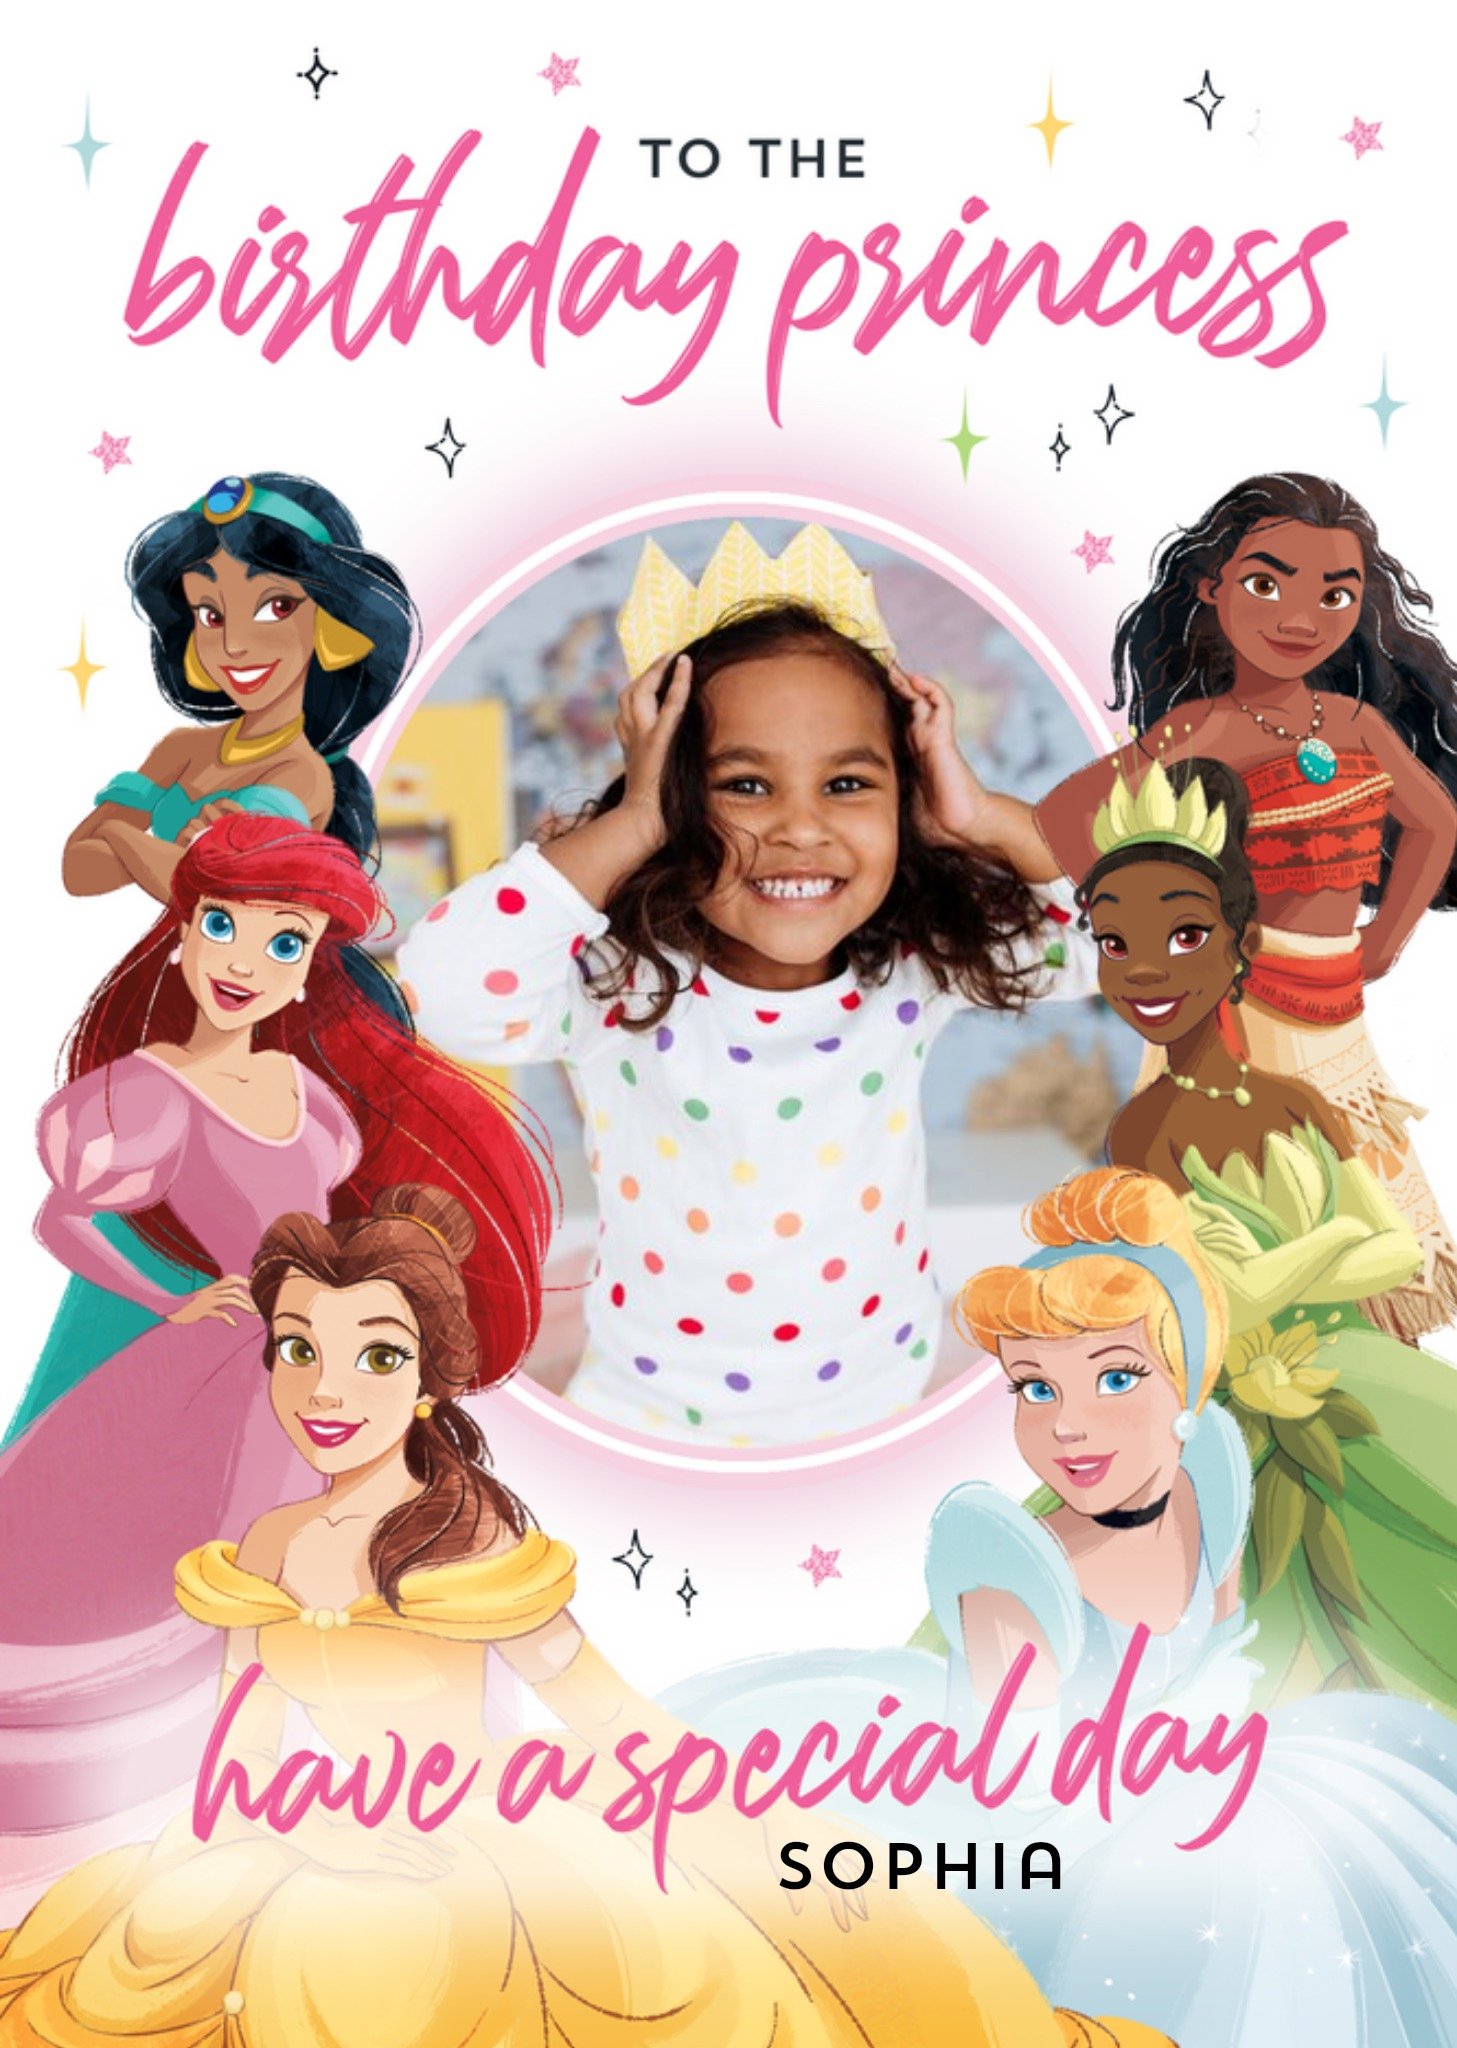 Disney Princesses Special Day Birthday Princess Photo Upload Card From Disney, Large